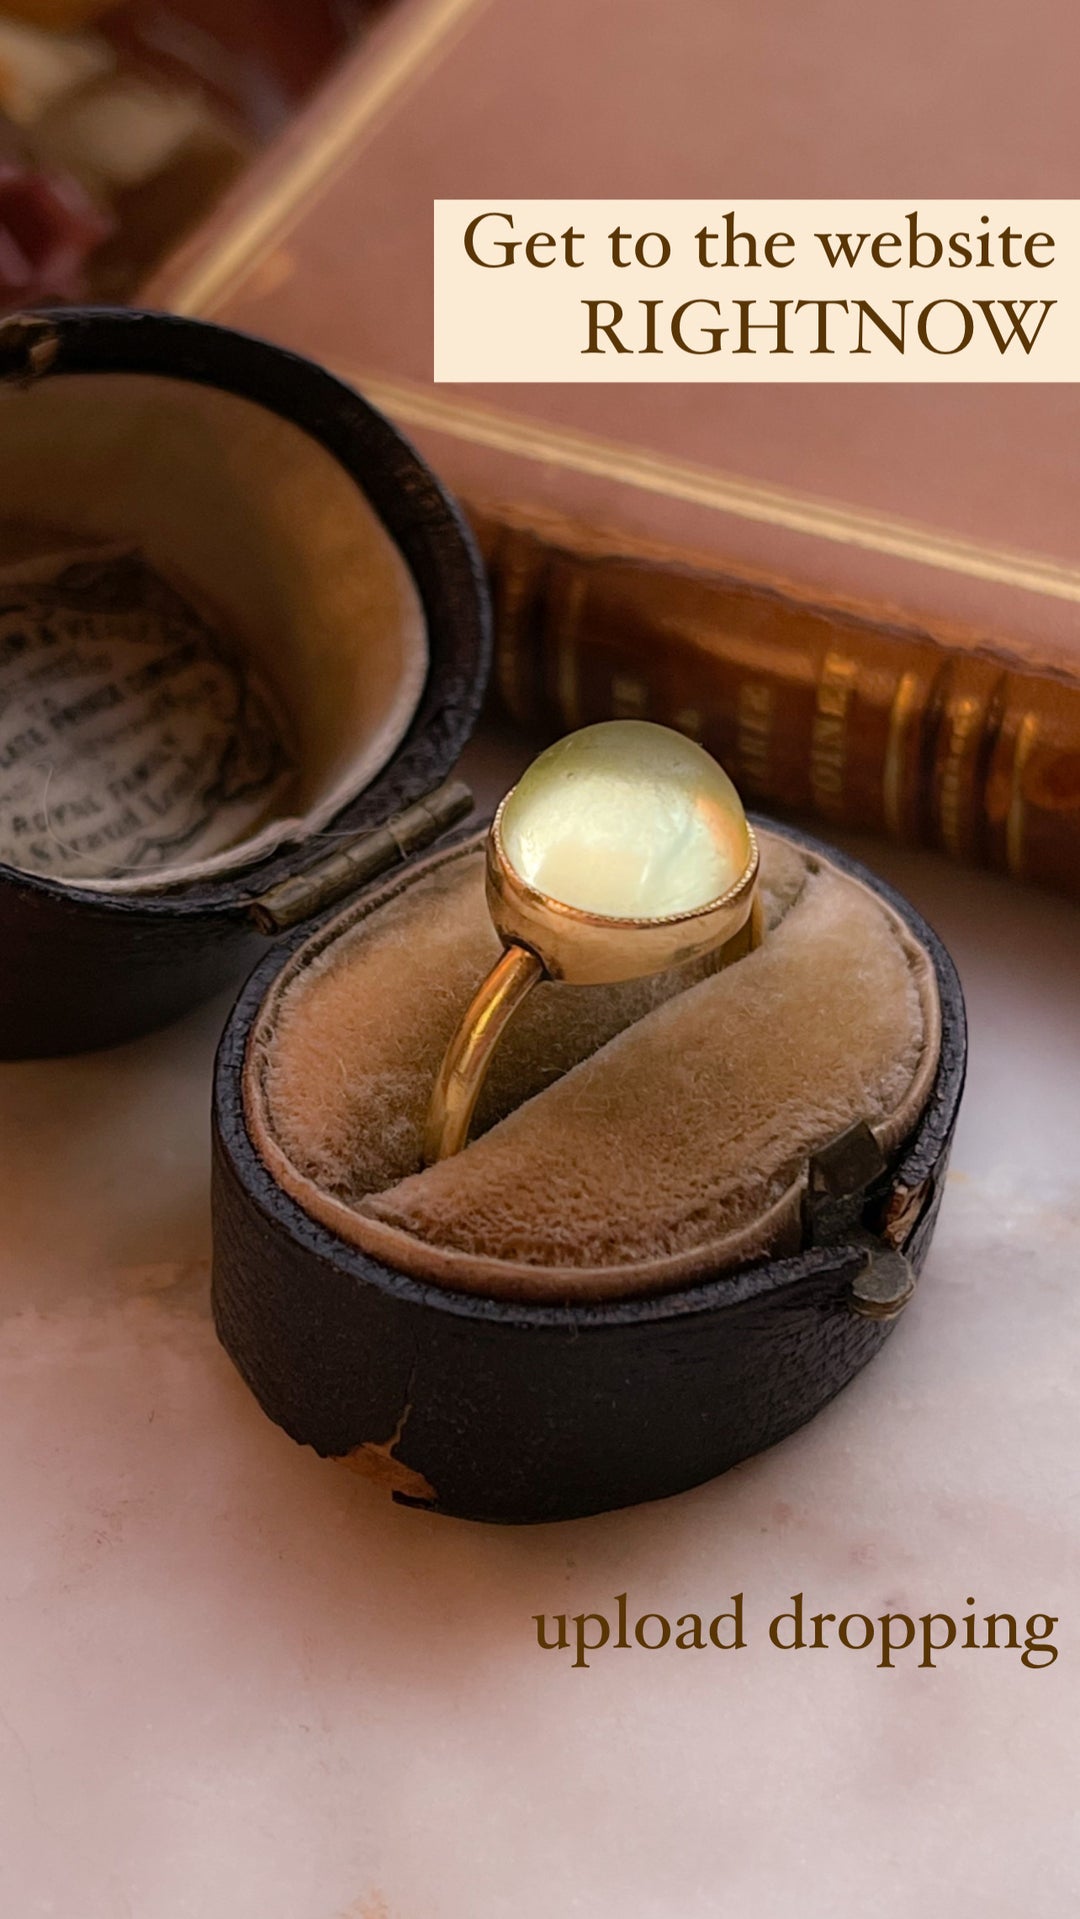 French 18k Ring Featuring Sphere of Sage Green Glass to Mimic Peridot